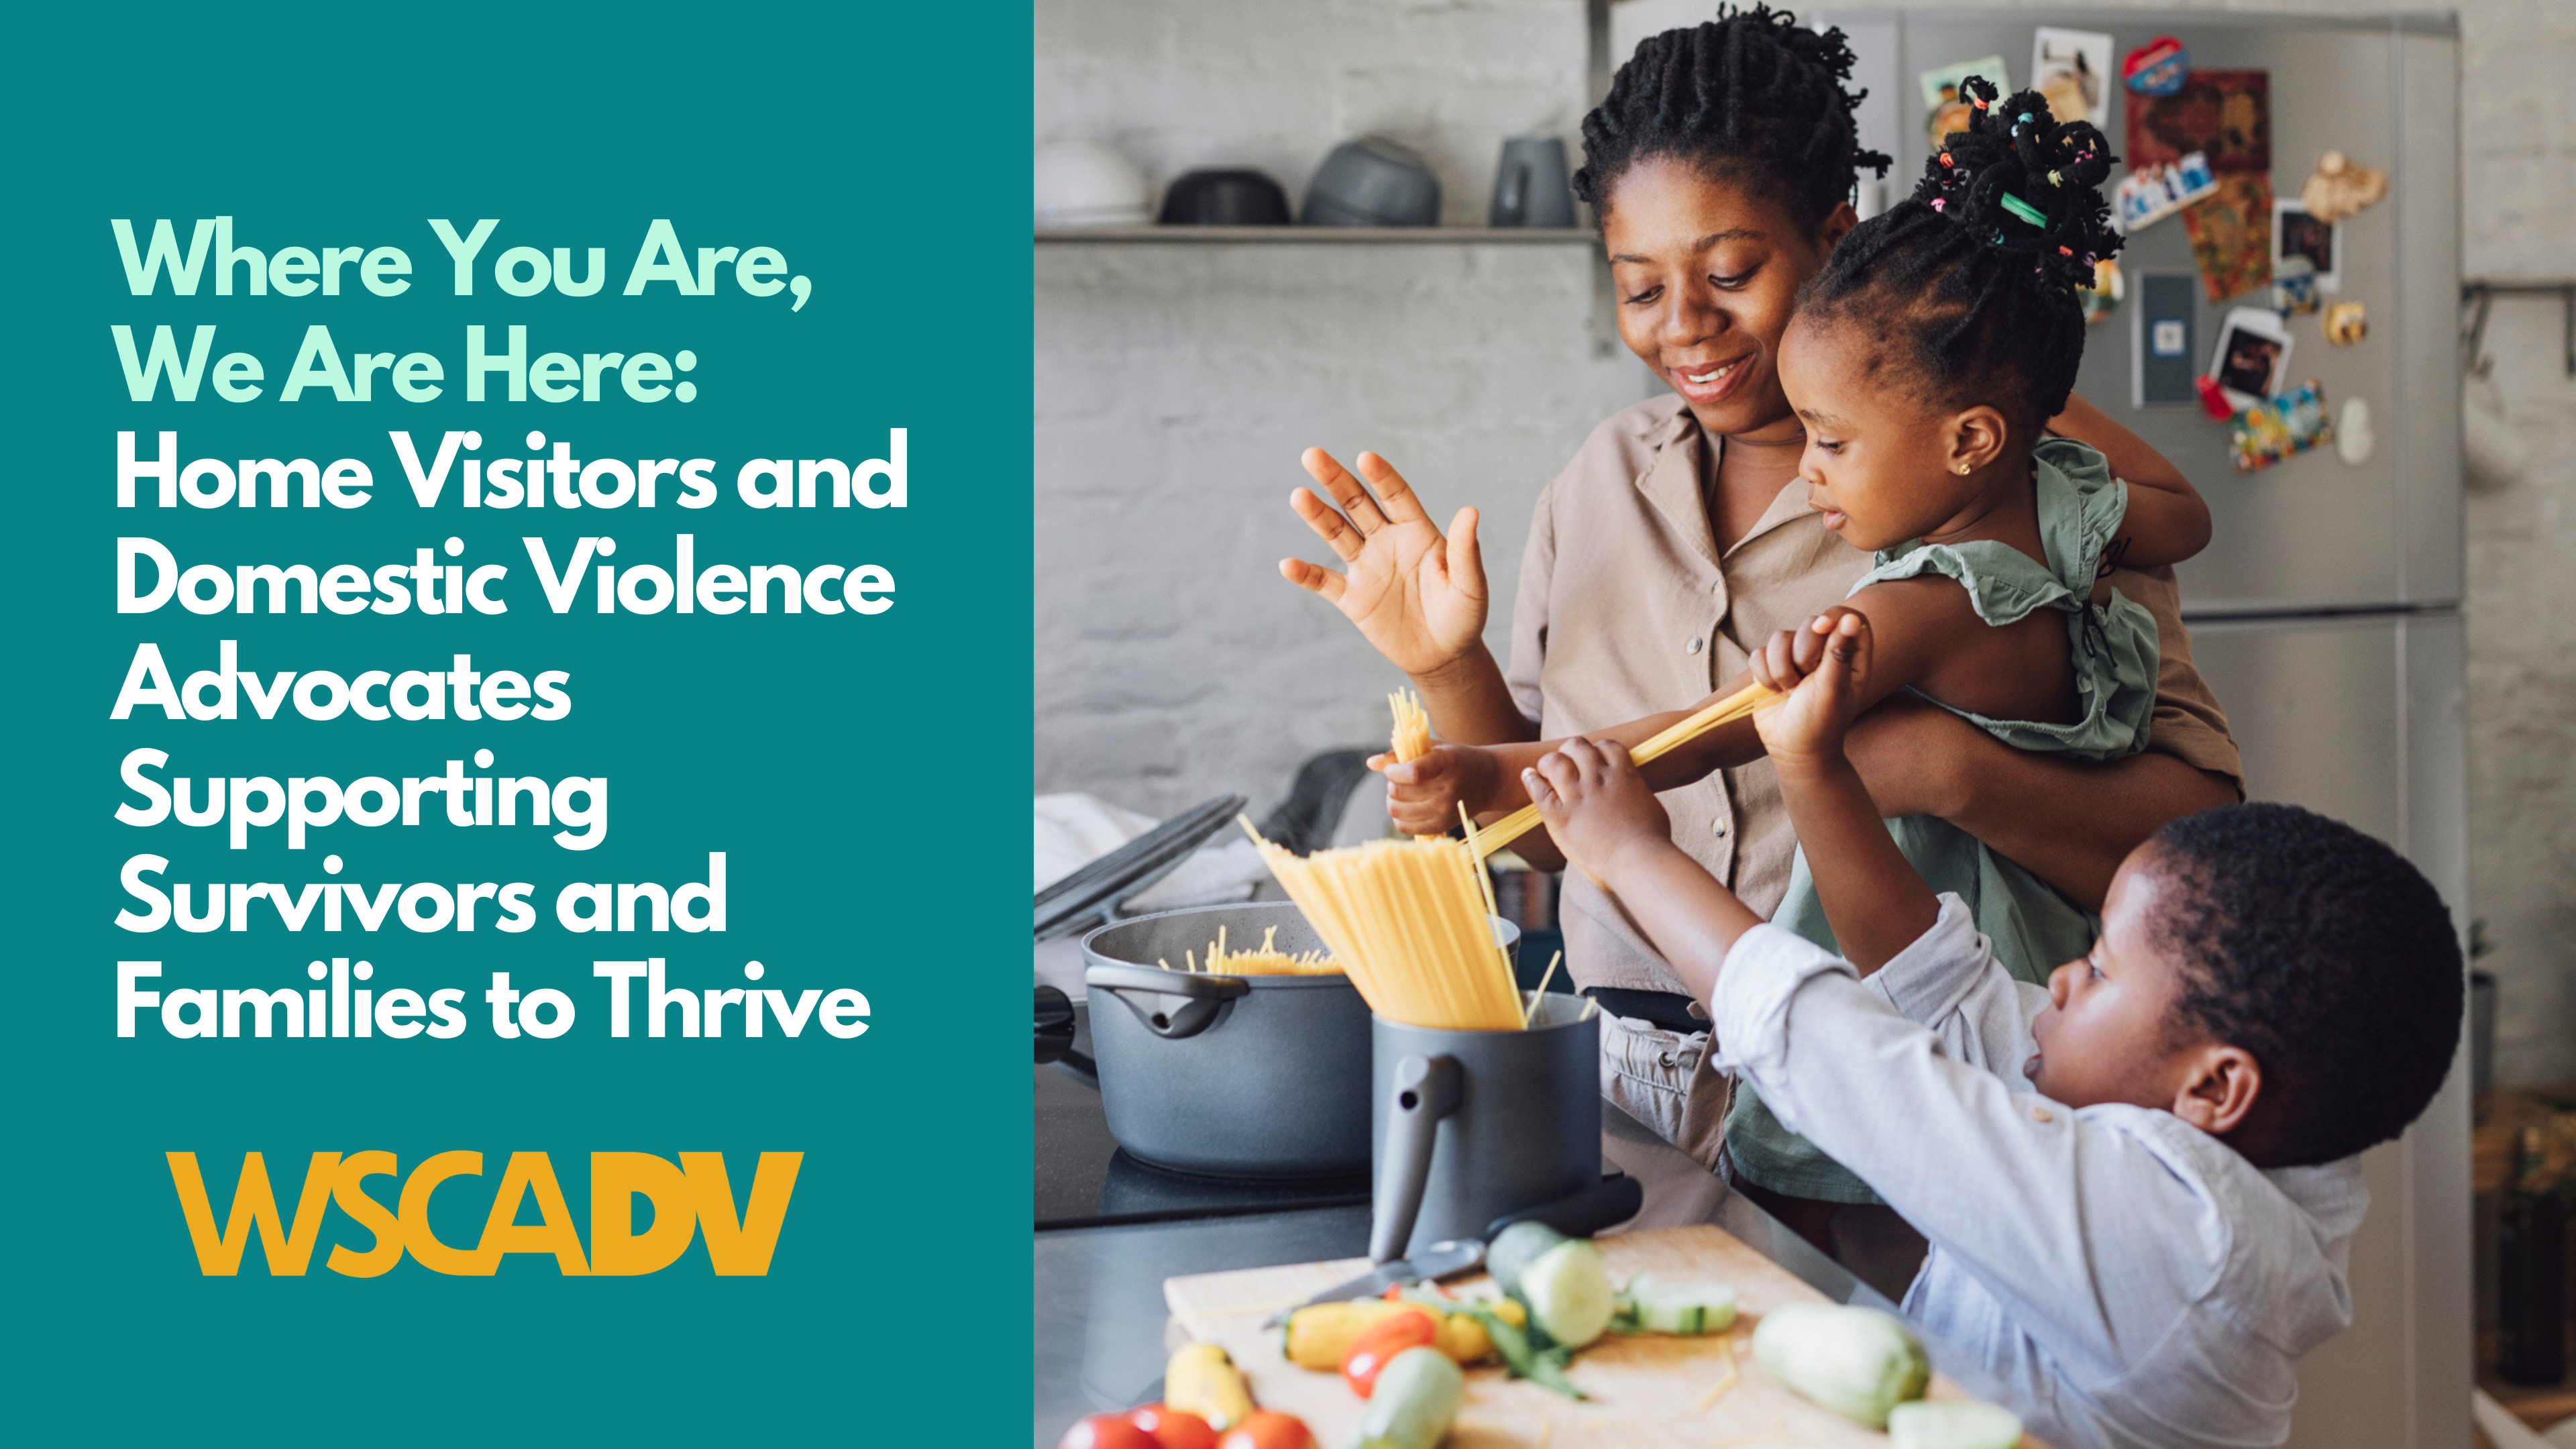 A photo of a mother cooking together with two young children. Text says "Where you are, we are here: Home visitors and domestic violence advocates supporting survivors and families to thrive." Gold WSCADV logo is at the lower left corner.